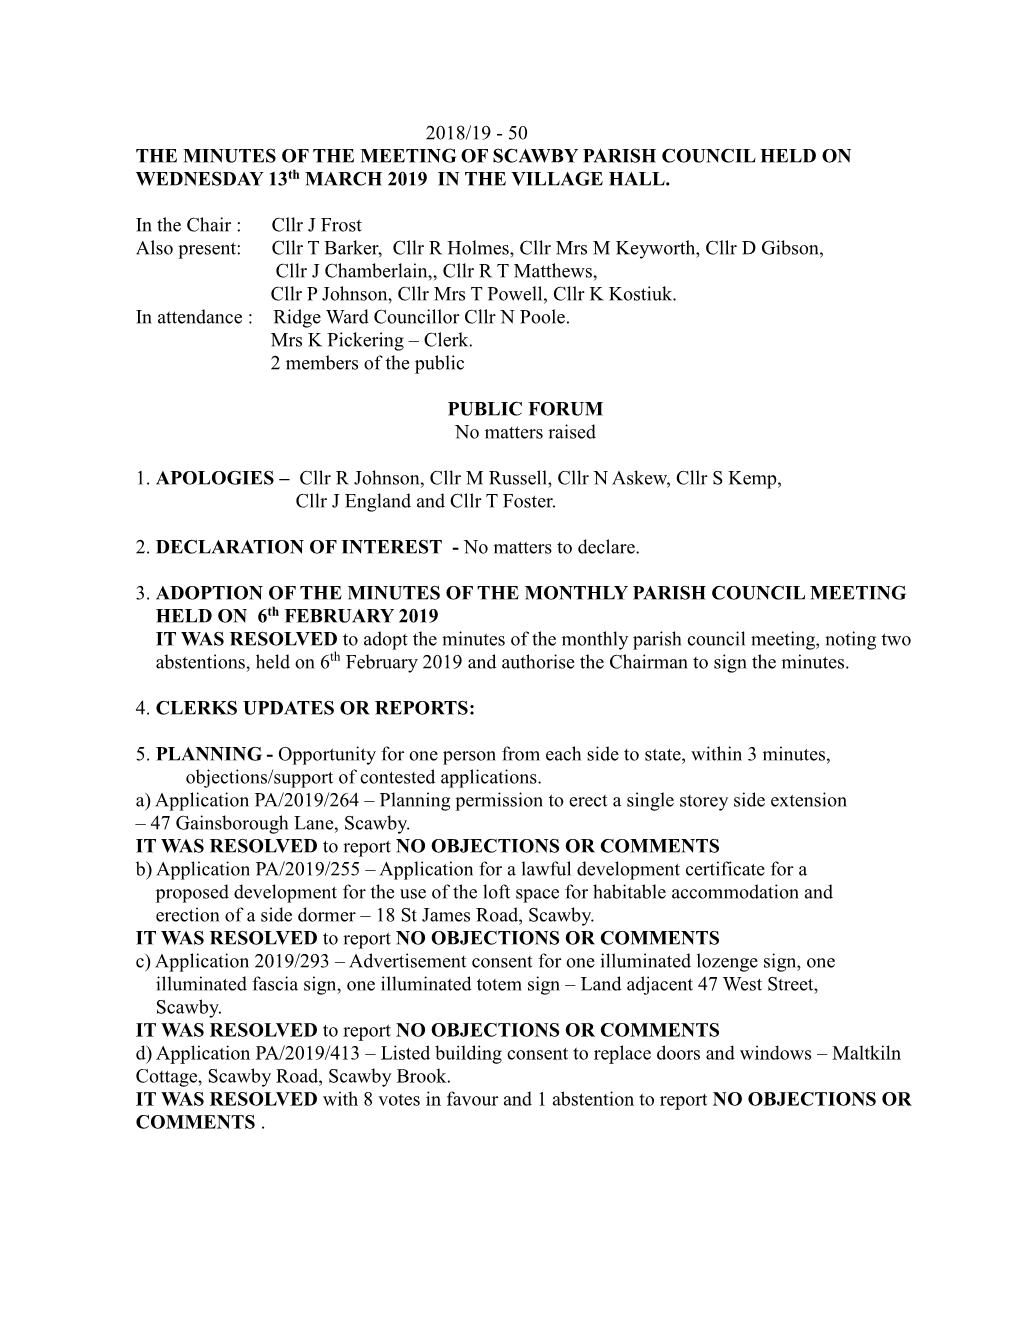 2018/19 - 50 the MINUTES of the MEETING of SCAWBY PARISH COUNCIL HELD on WEDNESDAY 13Th MARCH 2019 in the VILLAGE HALL